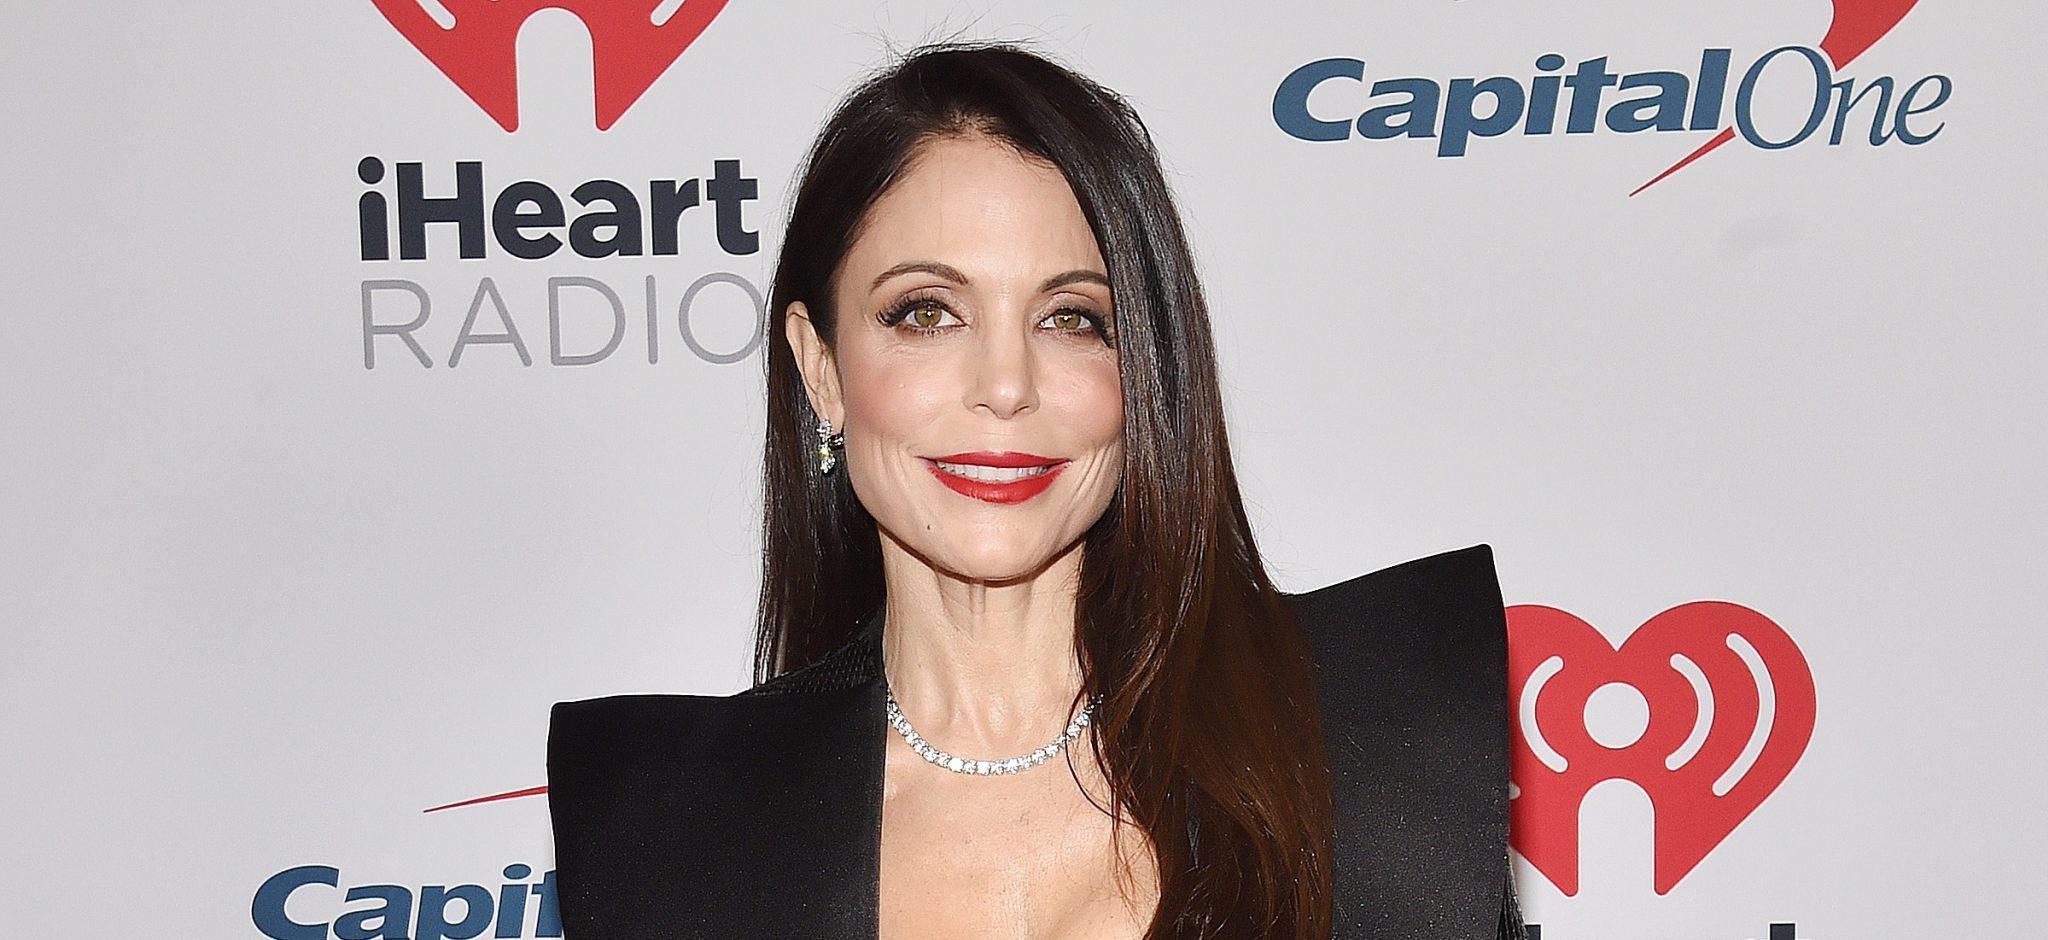 Bethenny Frankel Wants To Talk About THIS Concerning Hollywood Phenomenon